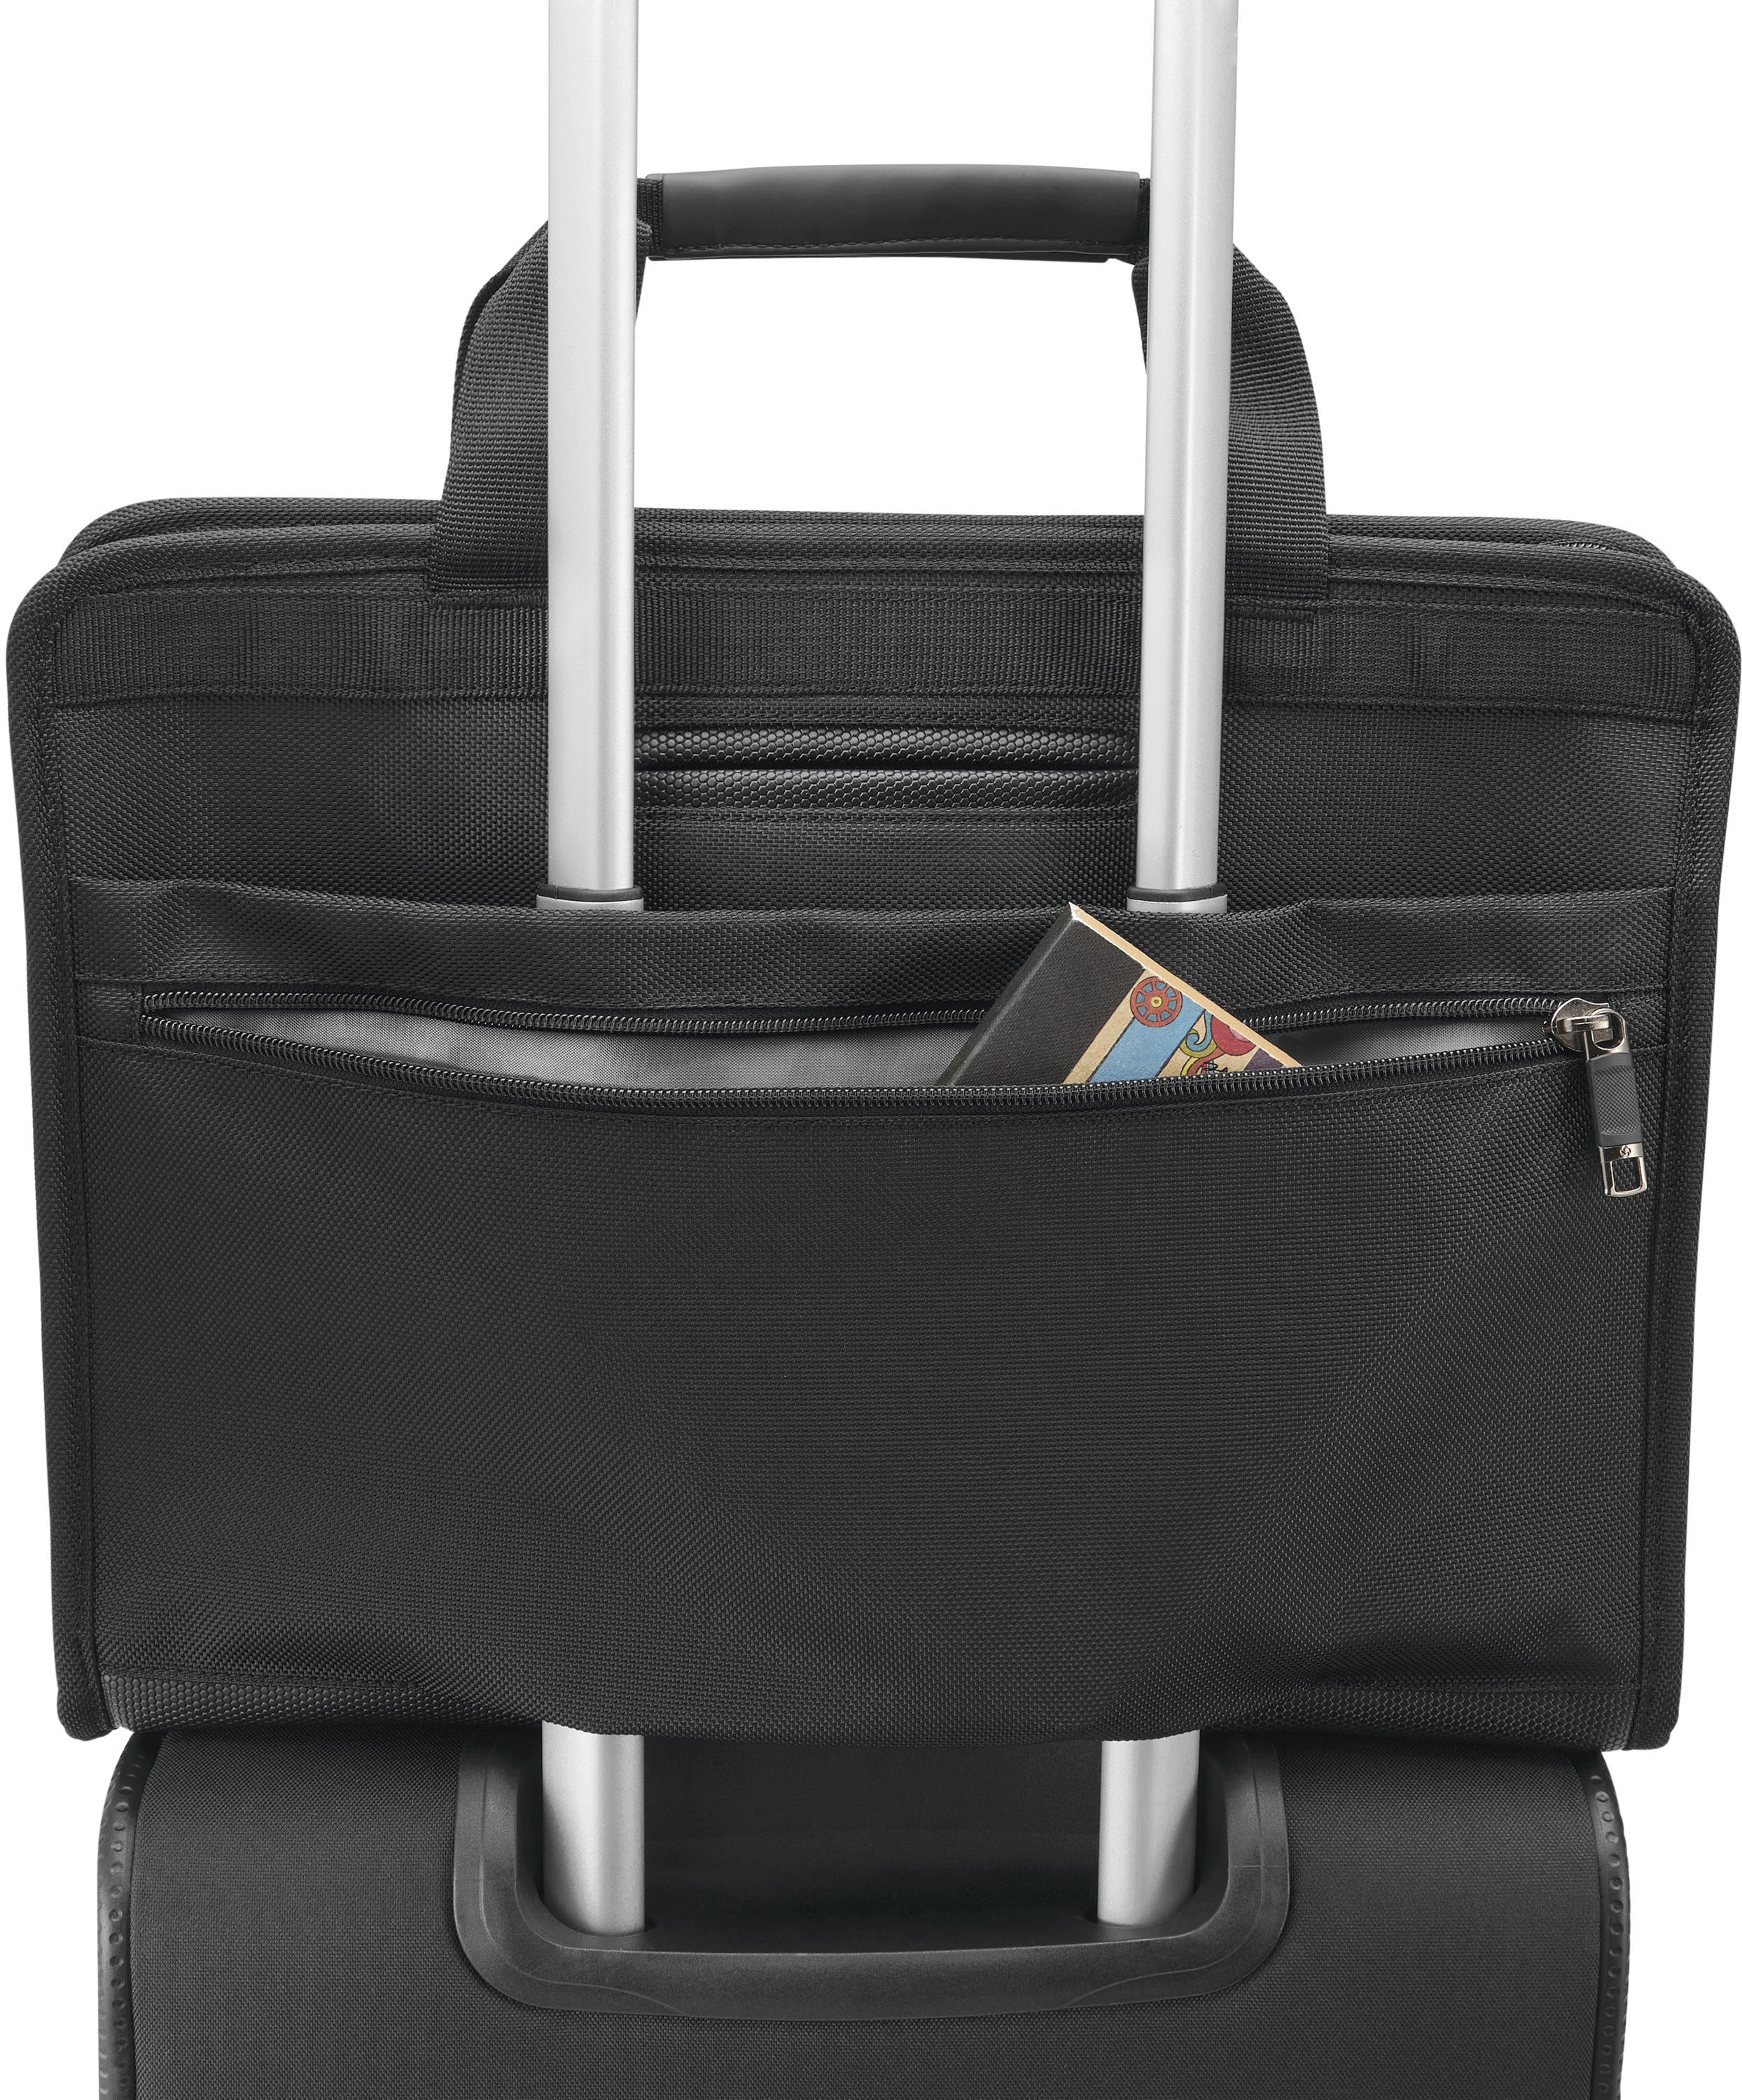 Samsonite Classic Business 2.0 Carrying Case (Briefcase) for 15.6  Notebook, Smartphone, Pen, Business Card, Document, Accessories, Tablet PC  - Black - Polyester Body - Handle, Carrying Strap, Shoulder Strap - 12  Height